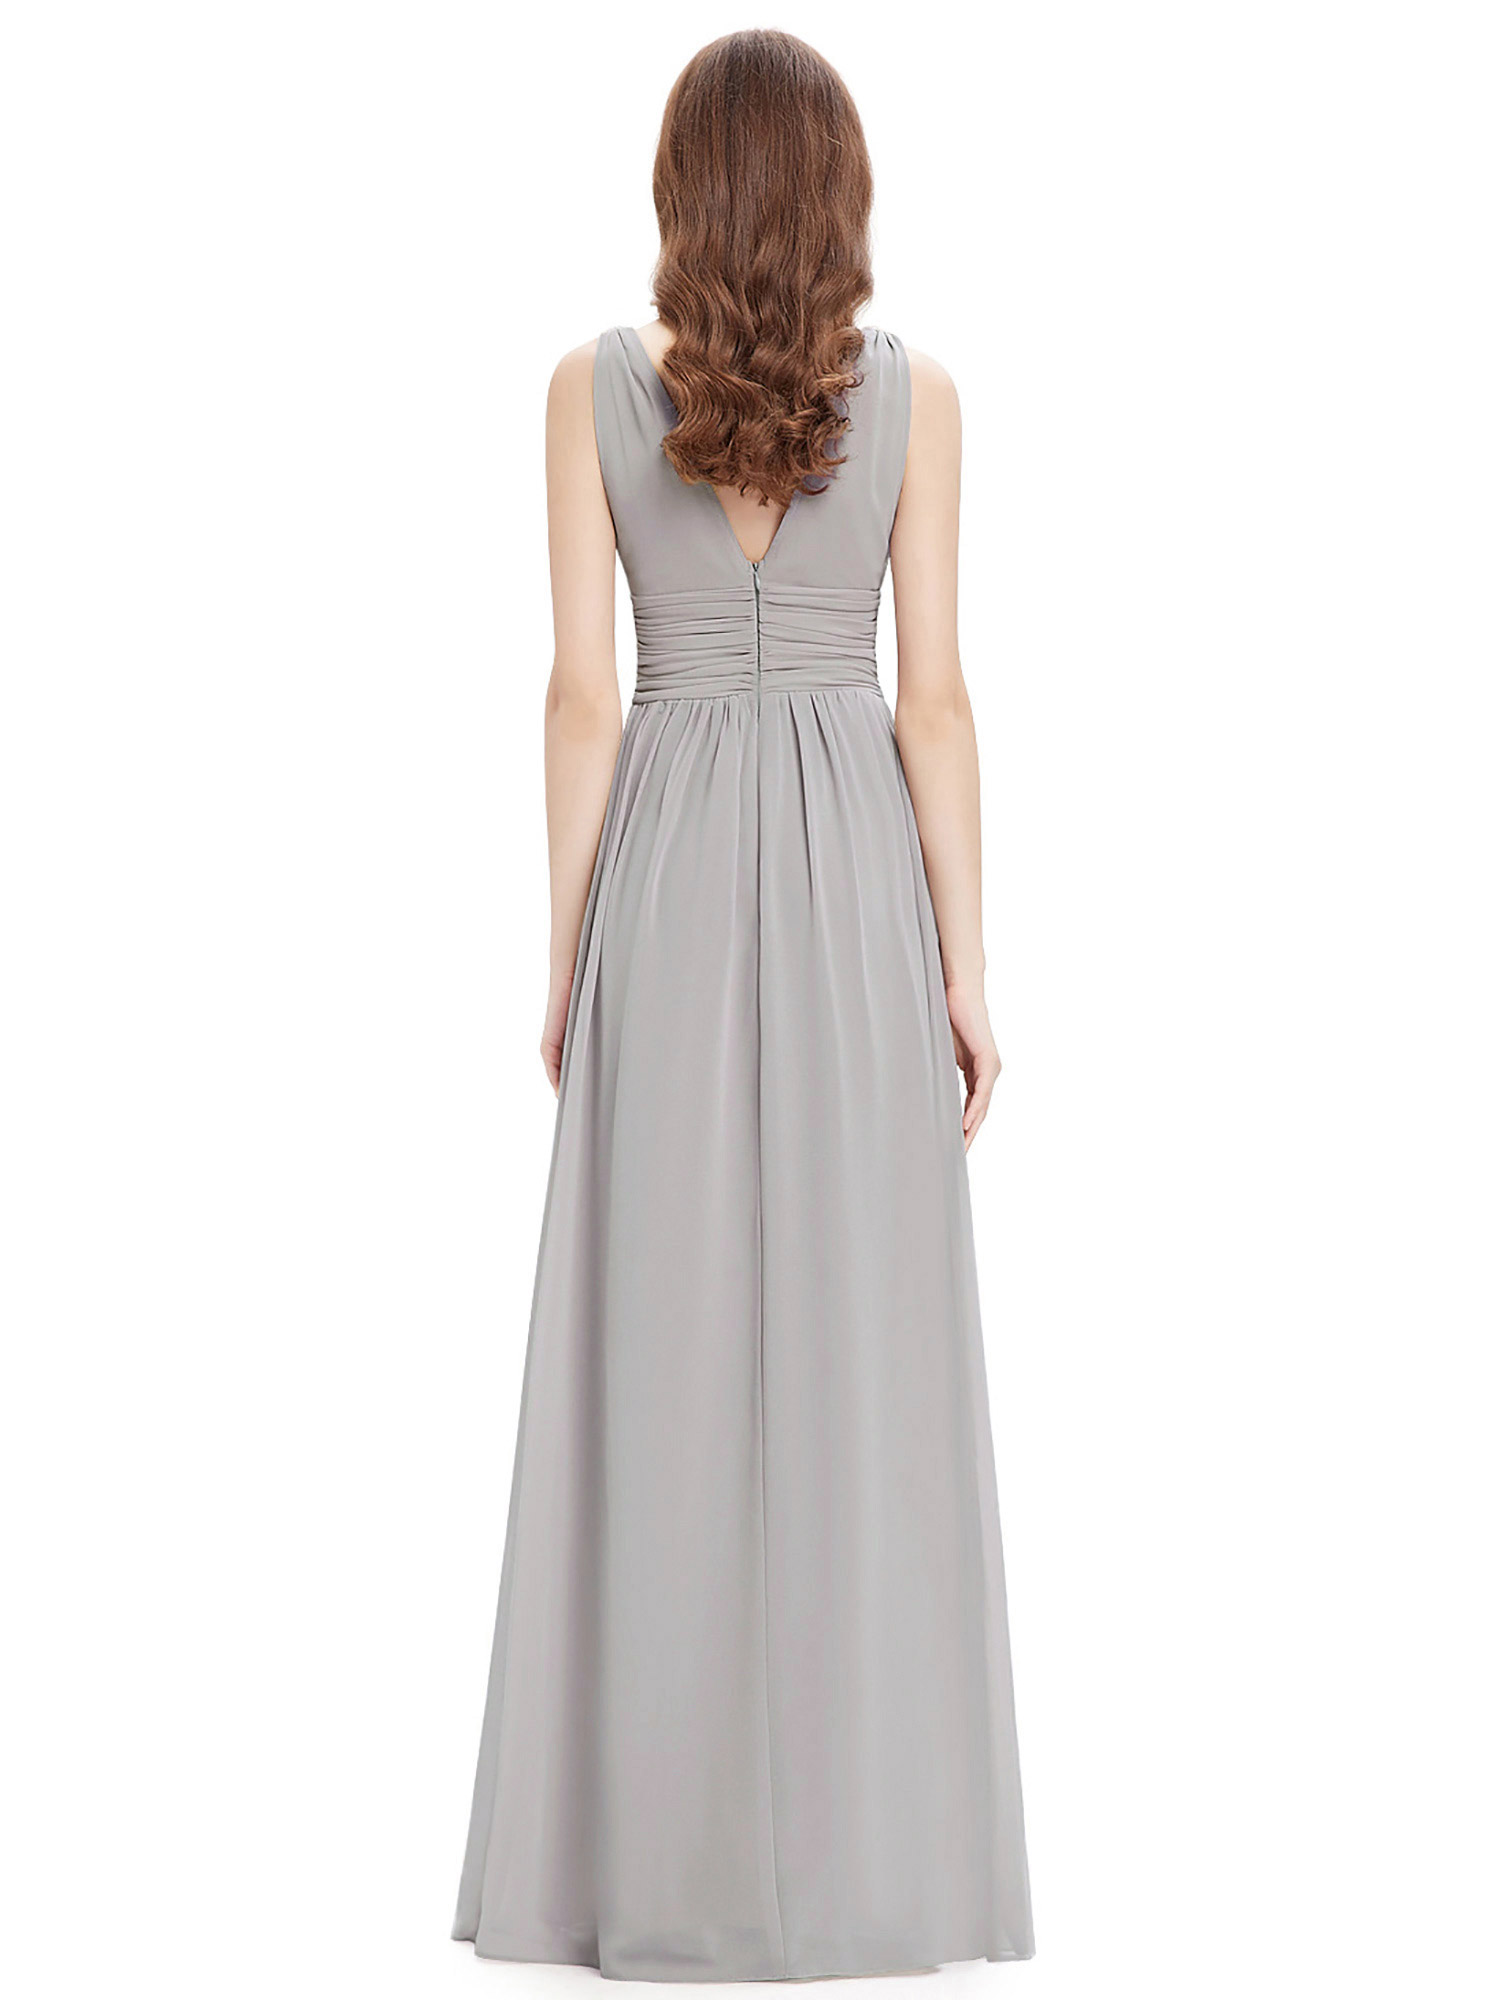 US Women's Sexy V-neck Long Formal Bridesmaid Evening Party Prom Dress ...